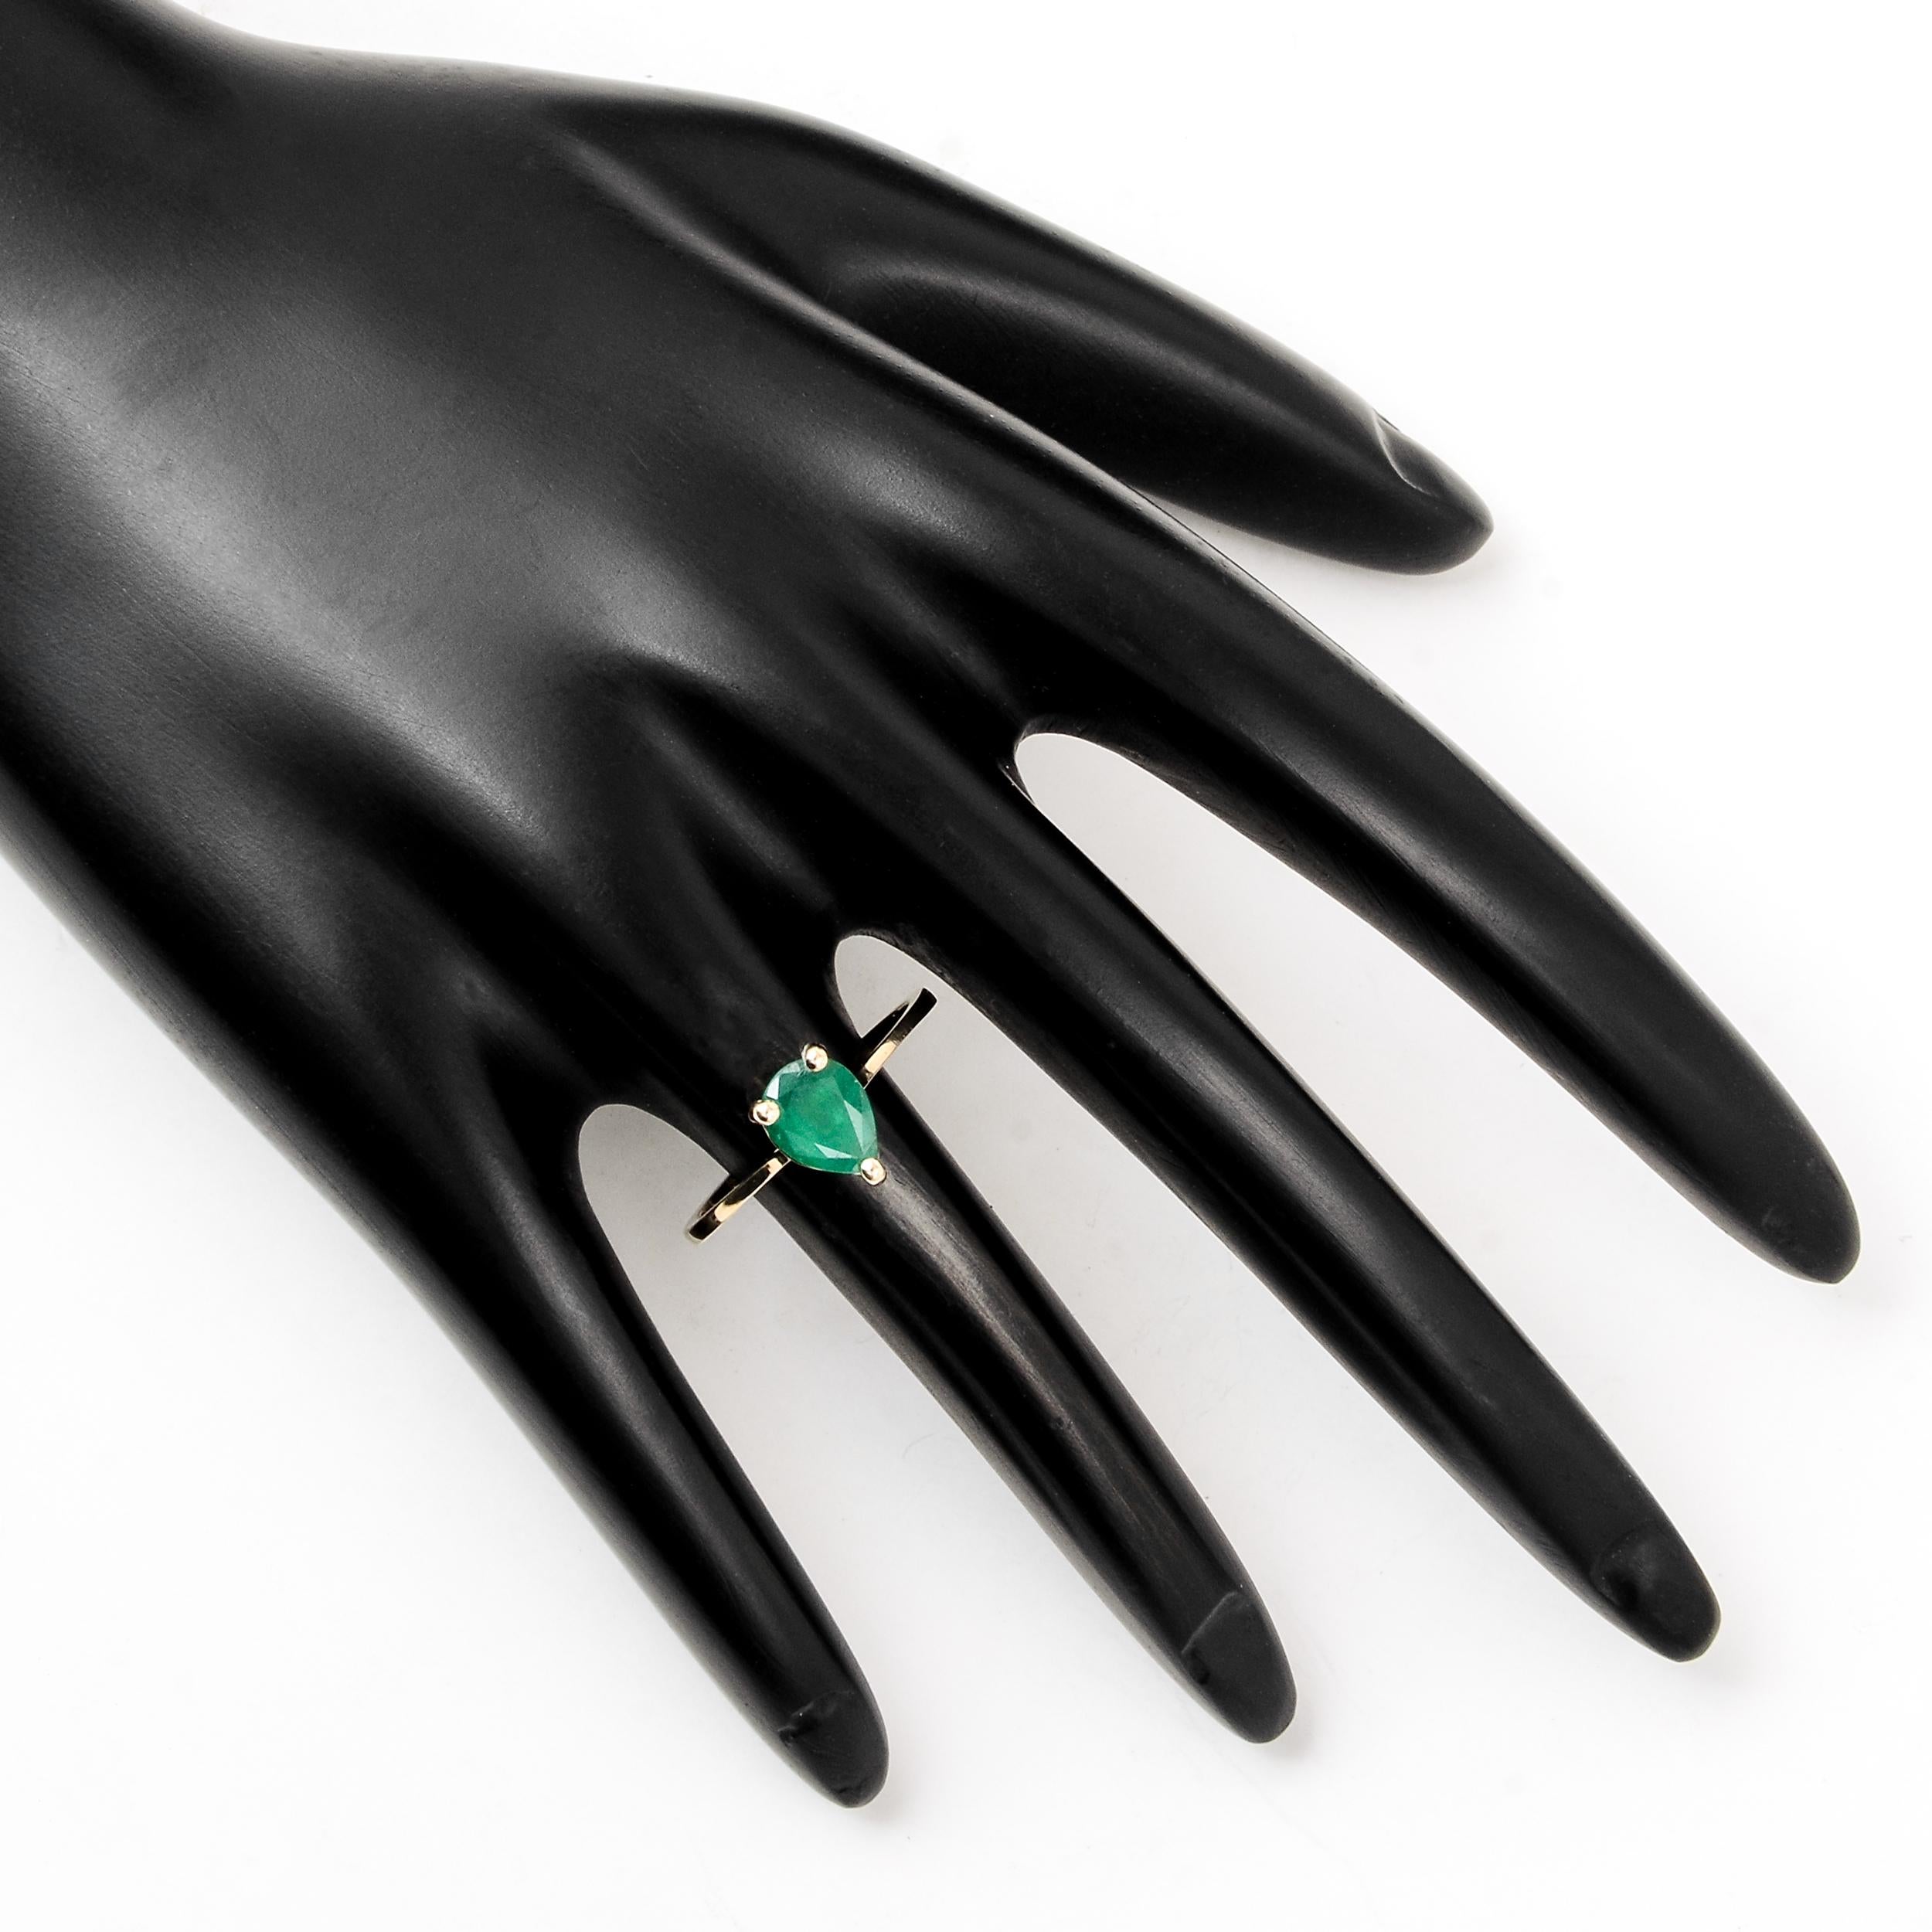 Women's Elegant 14K Emerald Cocktail Ring, Size 6.75 - Luxurious Statement Jewelry Piece For Sale